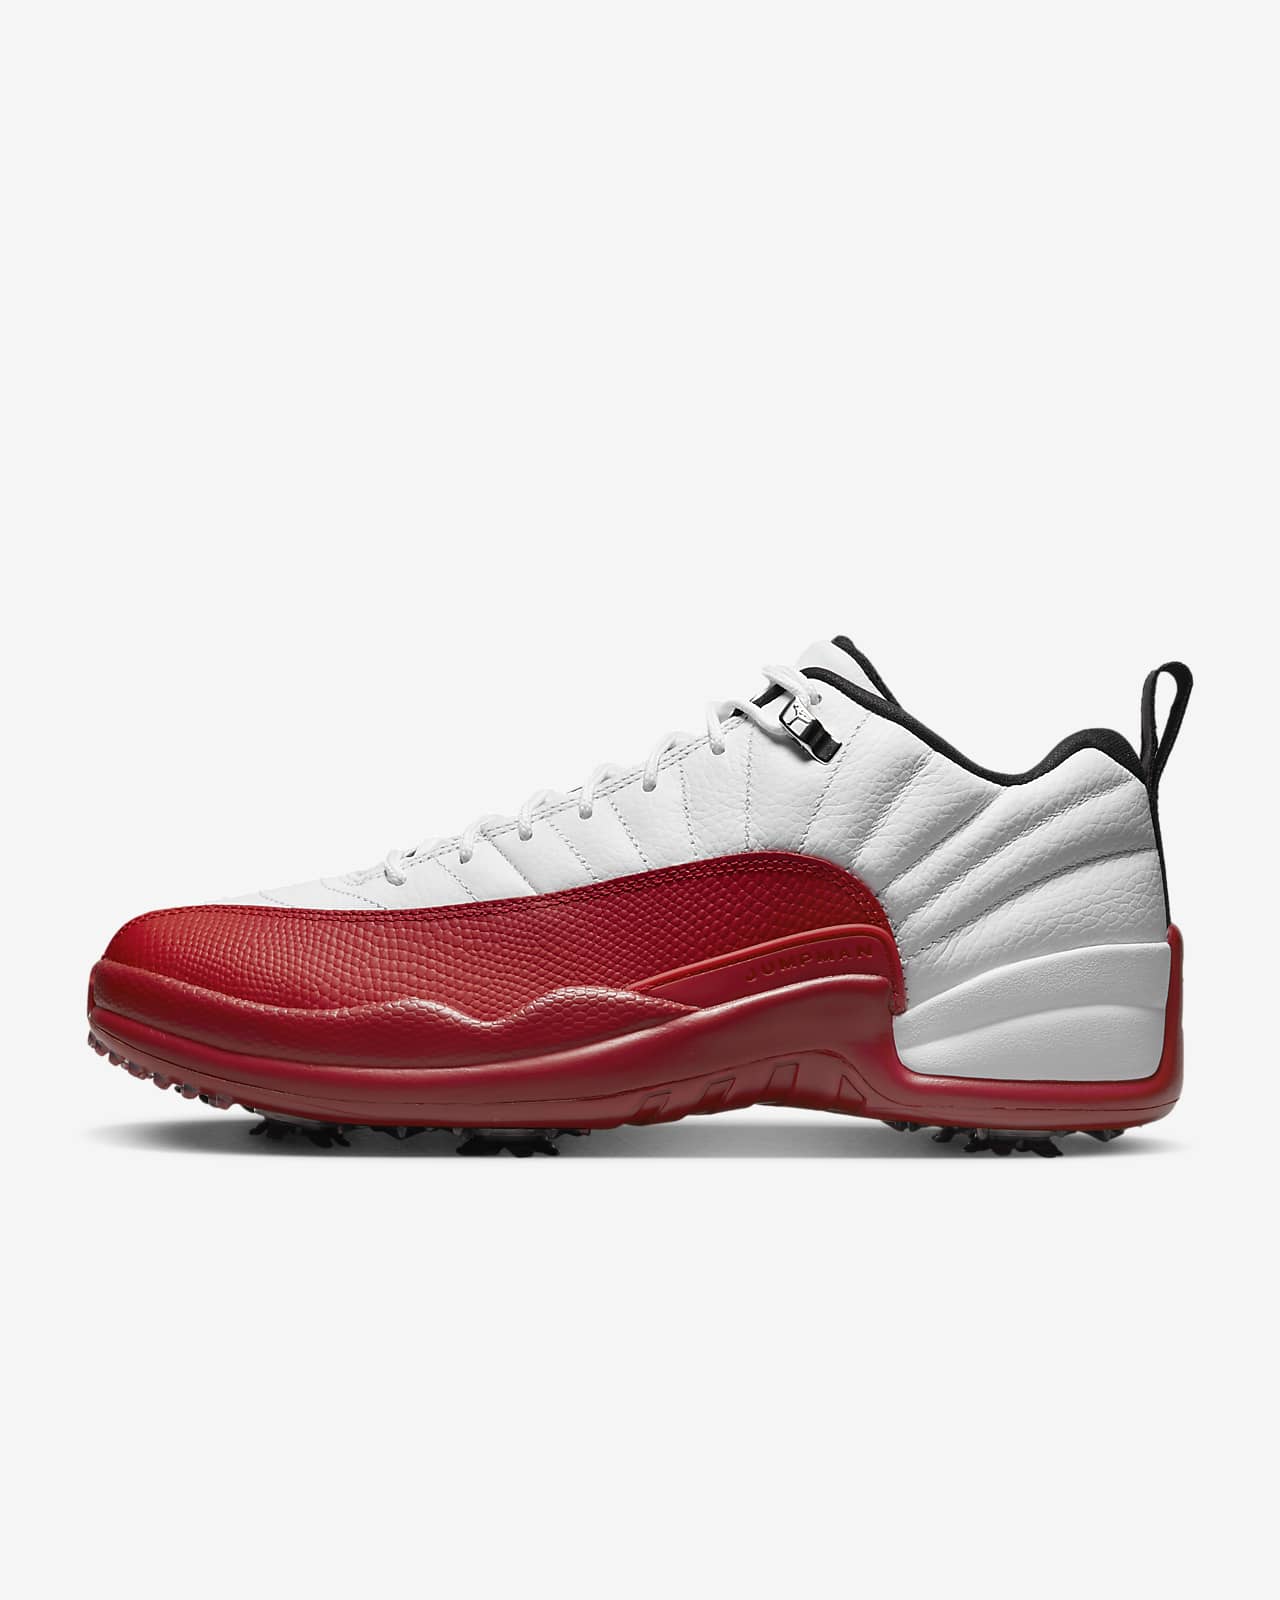 jordan white and red 12